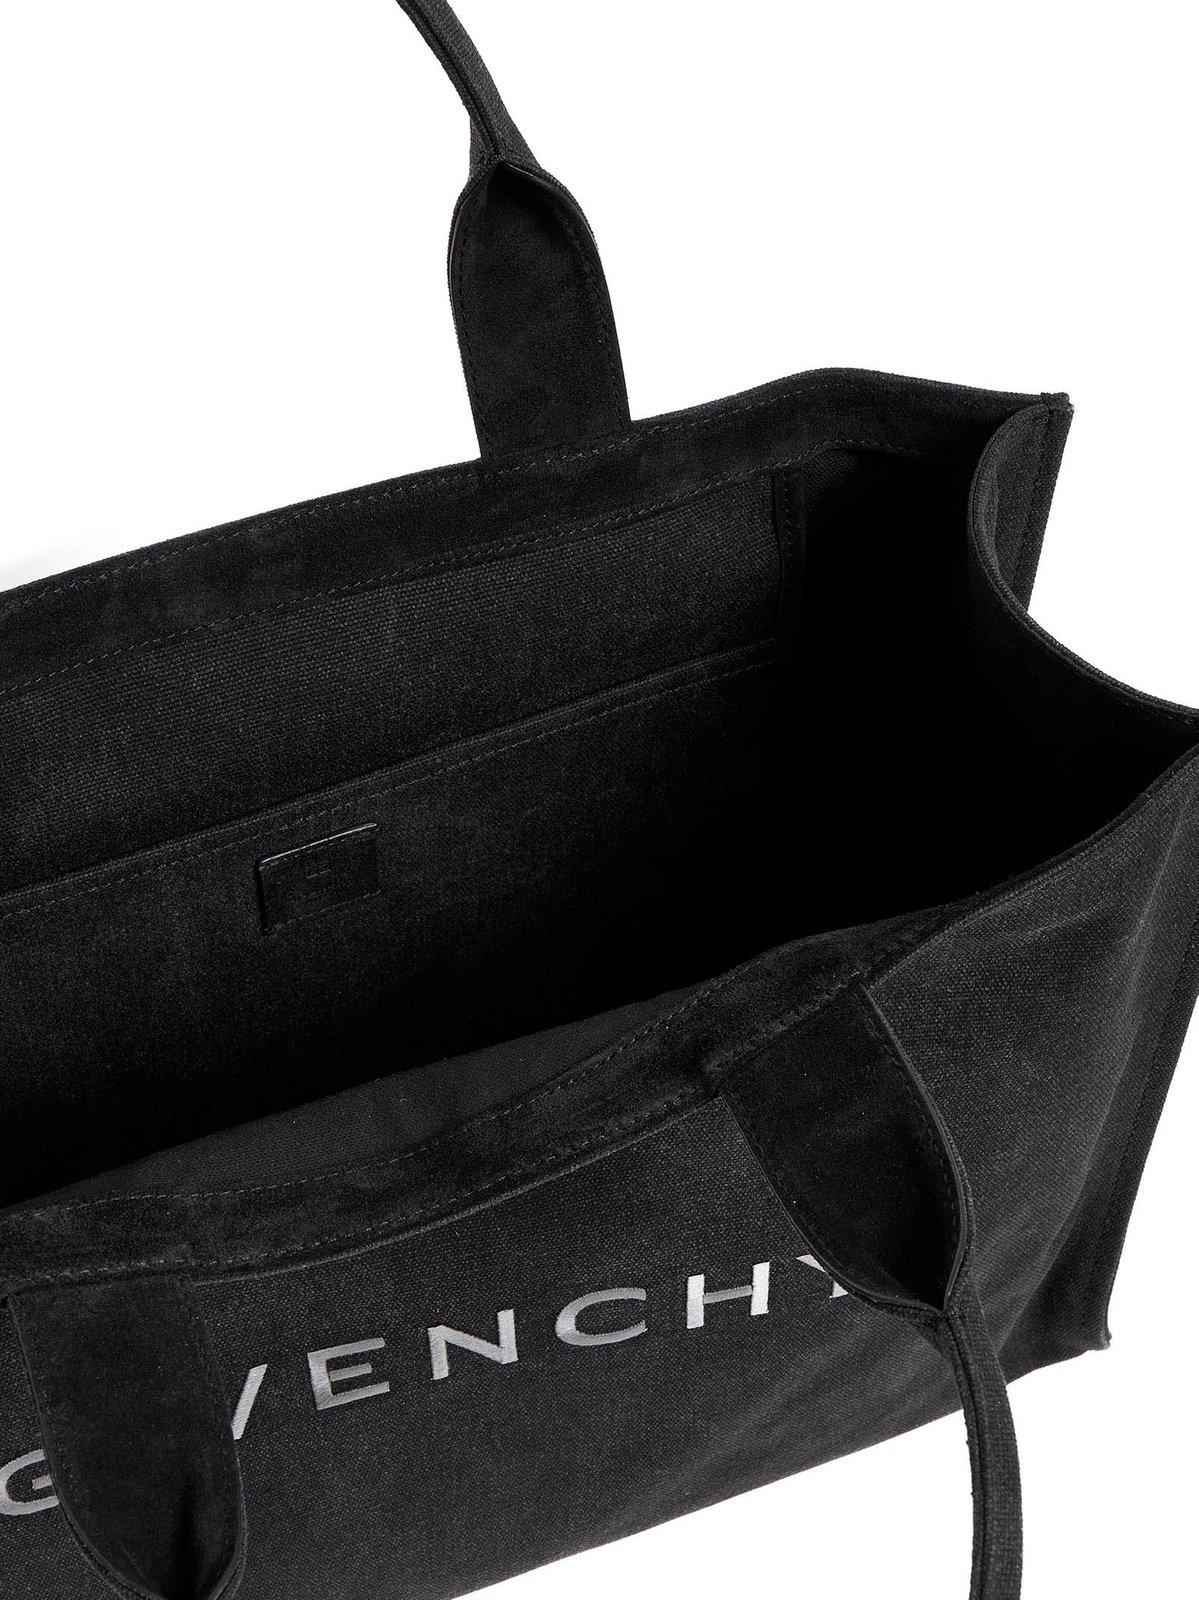 Shop Givenchy Logo Embroidered Open-top Tote Bag In Black